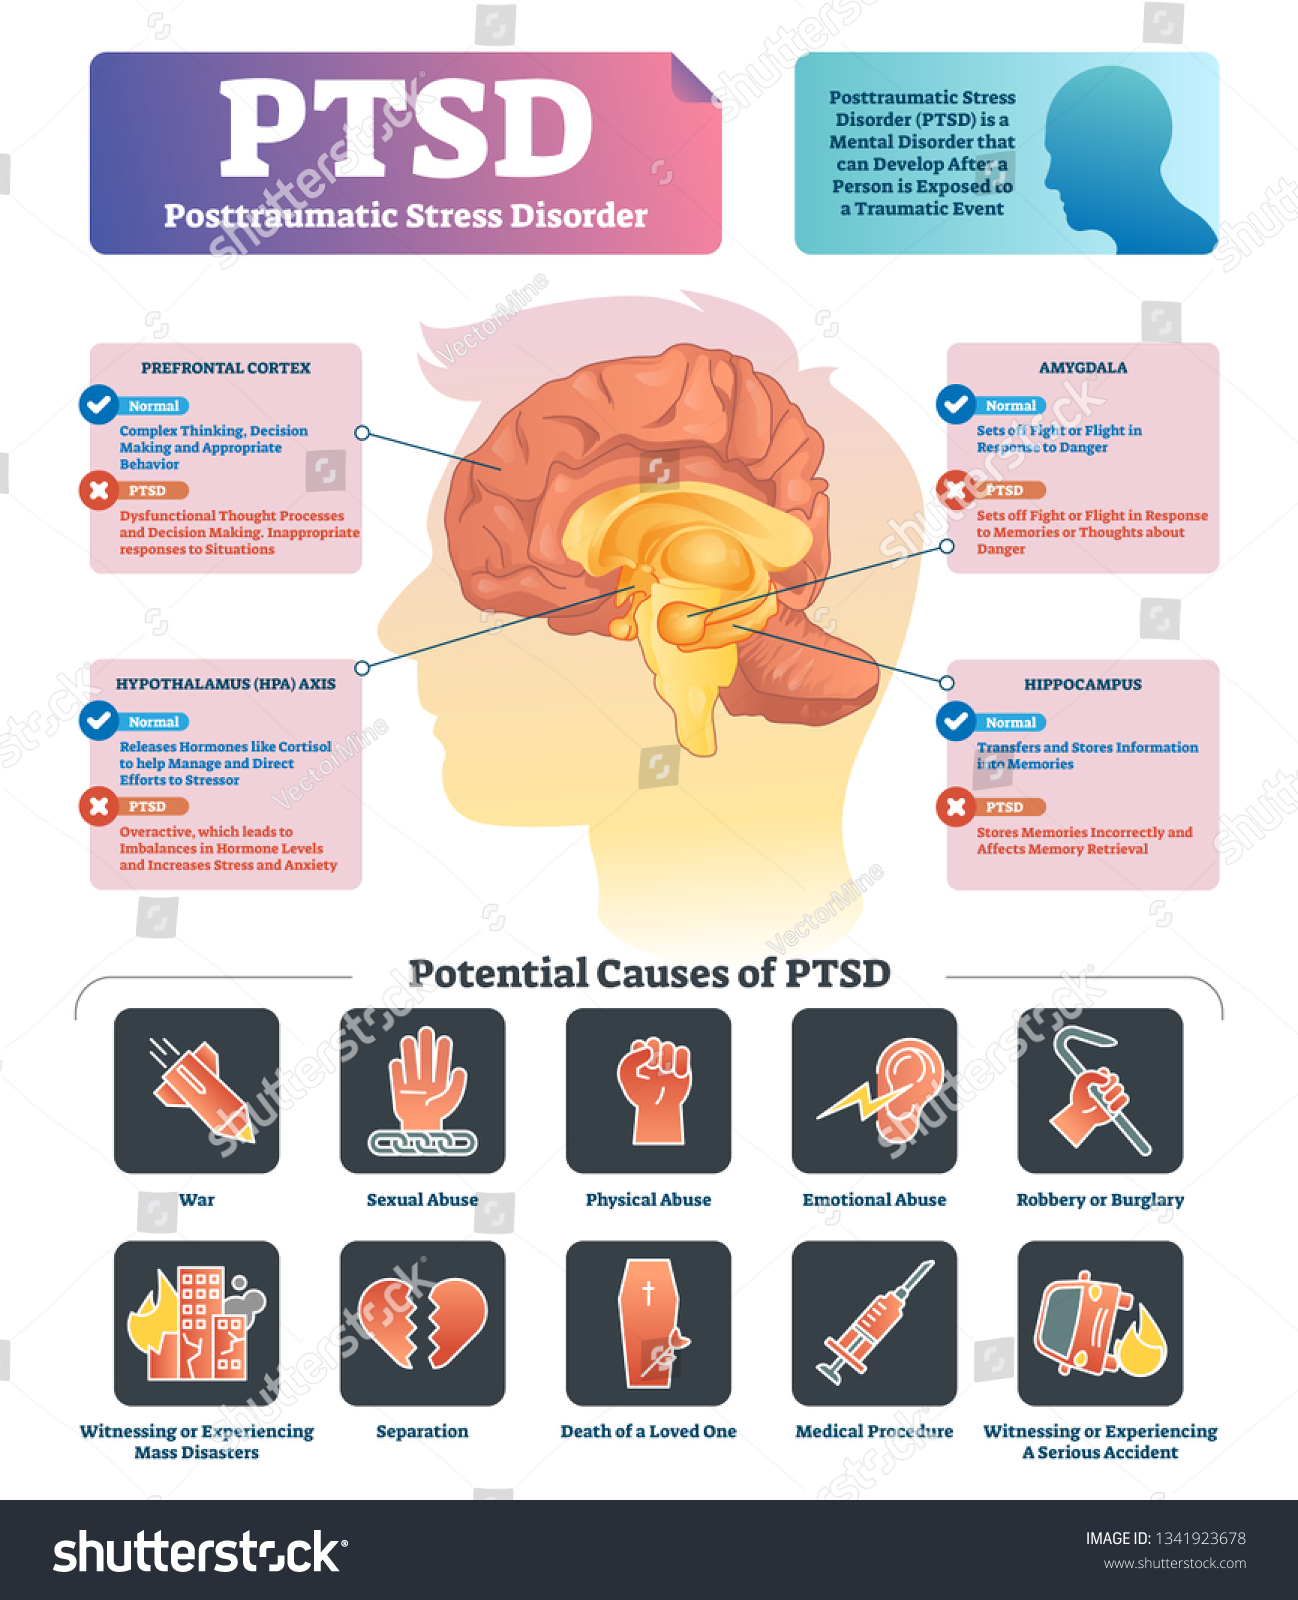 SVG of PTSD vector illustration. Labeled anatomical mental disorder causes scheme. Compared healthy and problematic brain differences set. Explained psychiatry diagnosis after disasters, abuse and accidents. svg